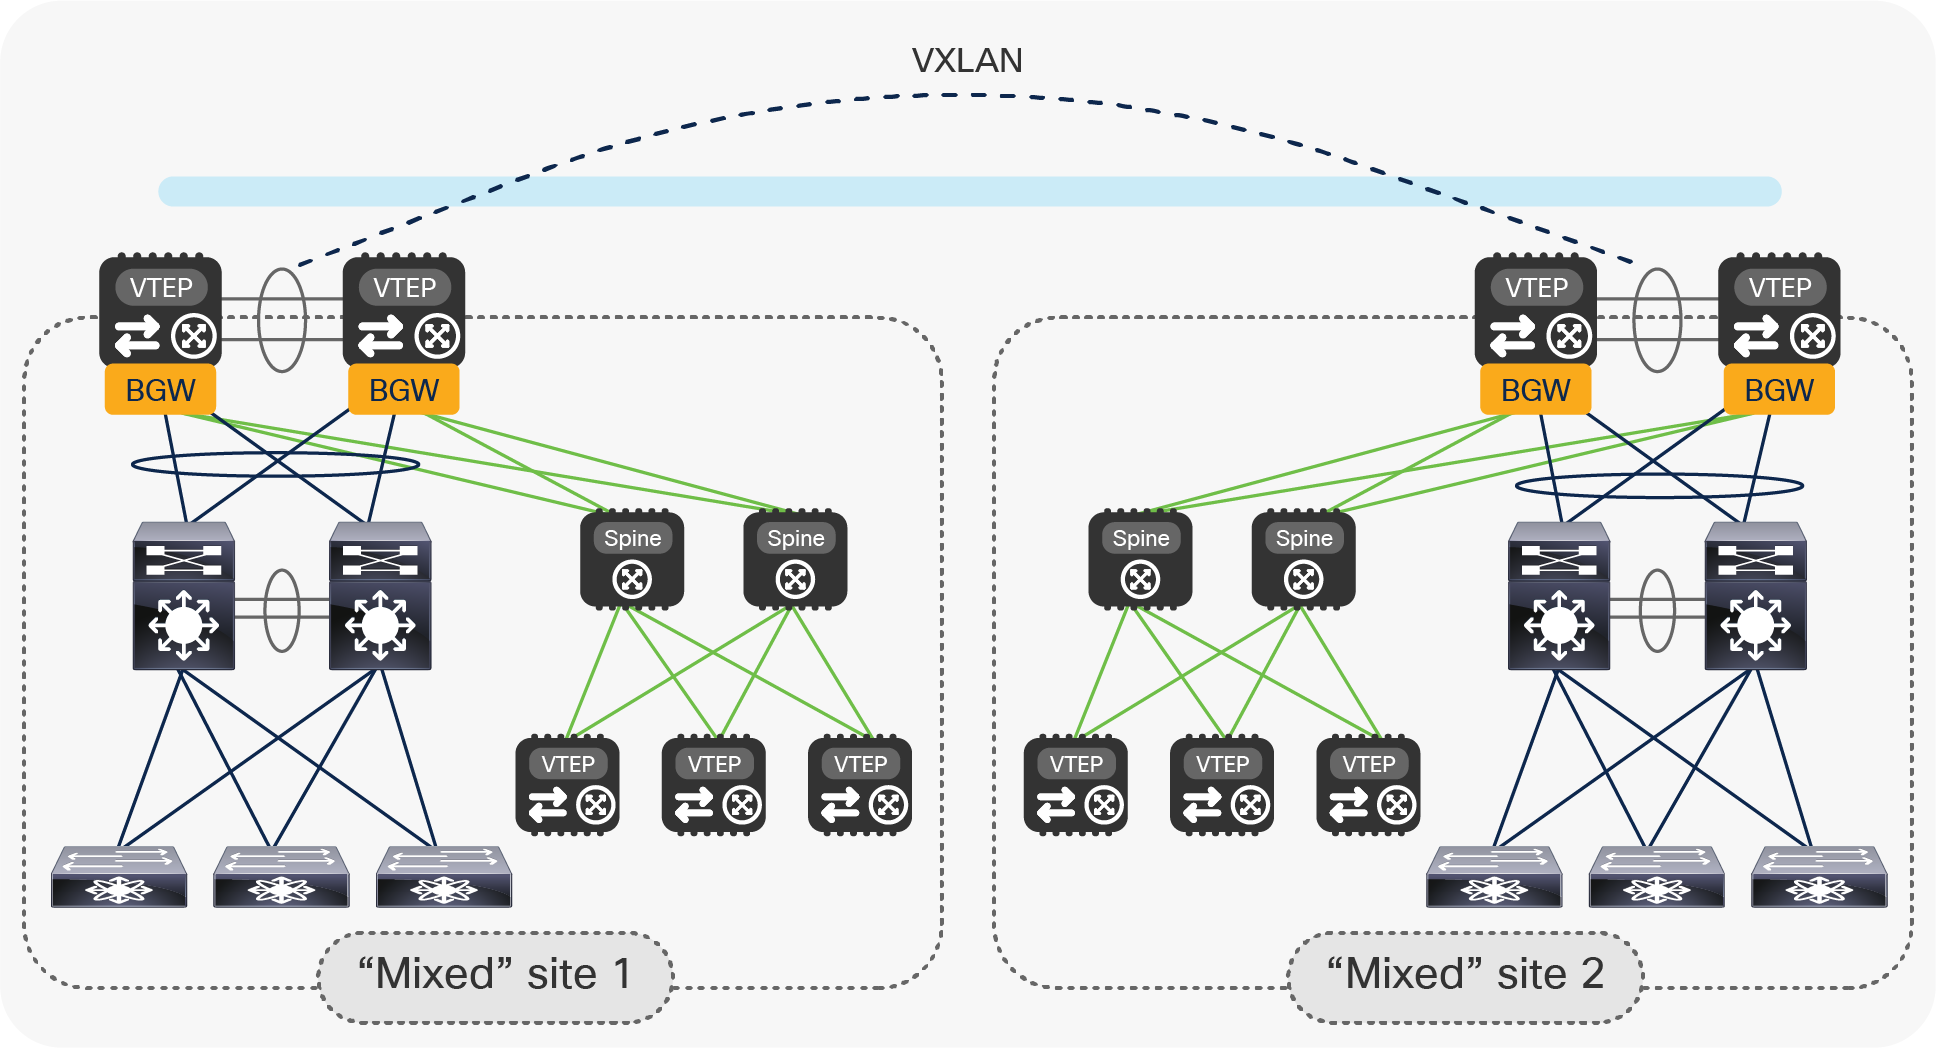 Initial step of the legacy data center migration to VXLAN EVPN fabrics with vPC BGW nodes